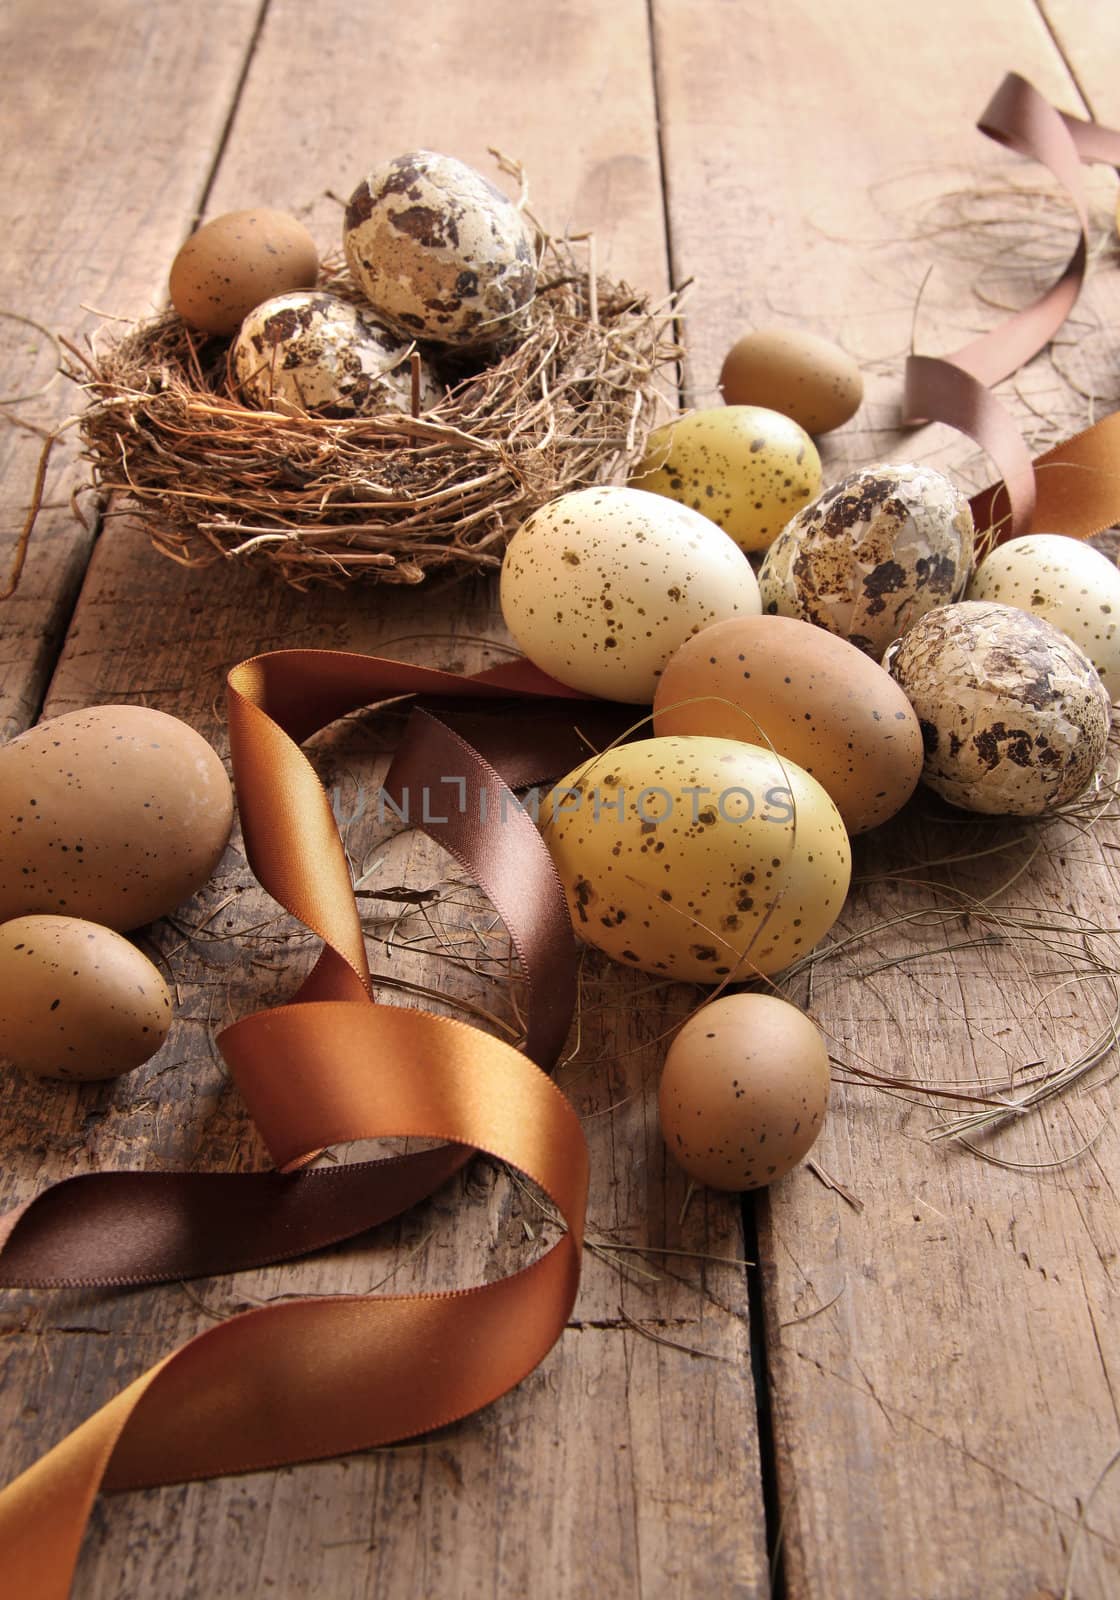 Brown and yellow eggs with ribbons for easter by Sandralise